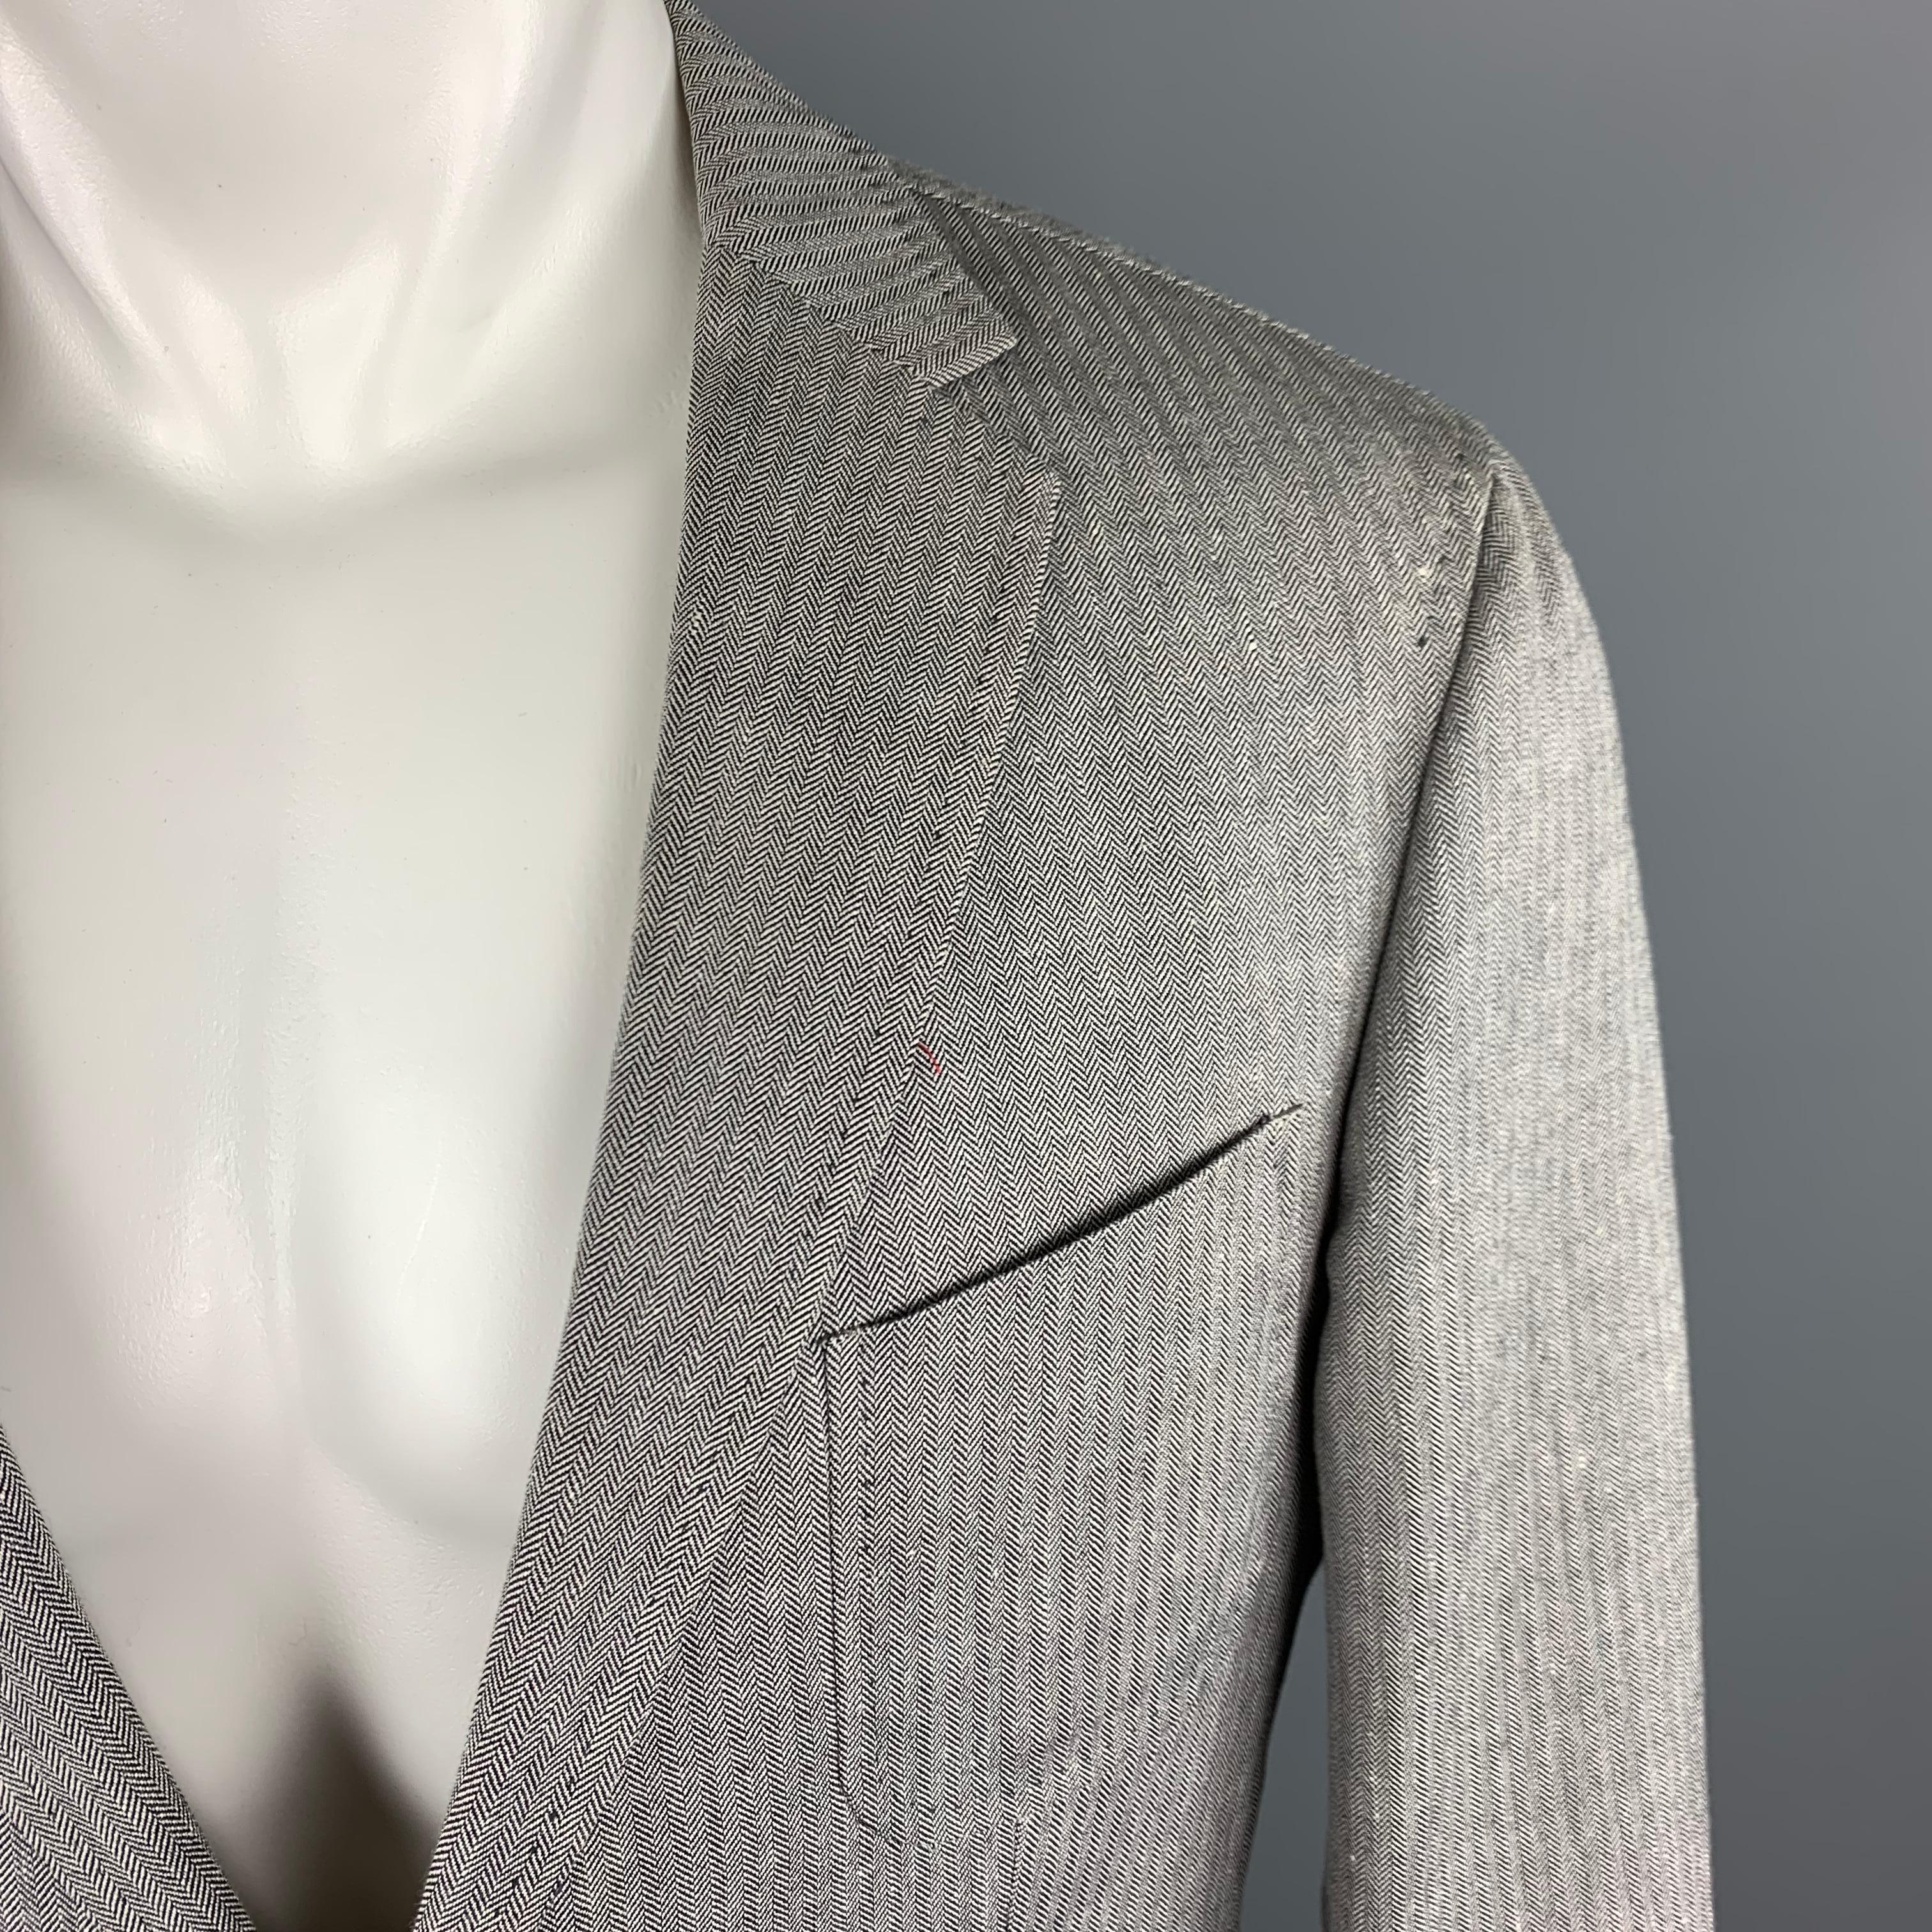 HUGO BOSS Sport Coat comes in a grey tone in a herringbone wool / linen material, with a notch lapel, patch pockets, two buttons at closure, single breasted, double vent at back and buttoned cuffs, unlined.
 
Excellent Pre-Owned Condition.
Marked: